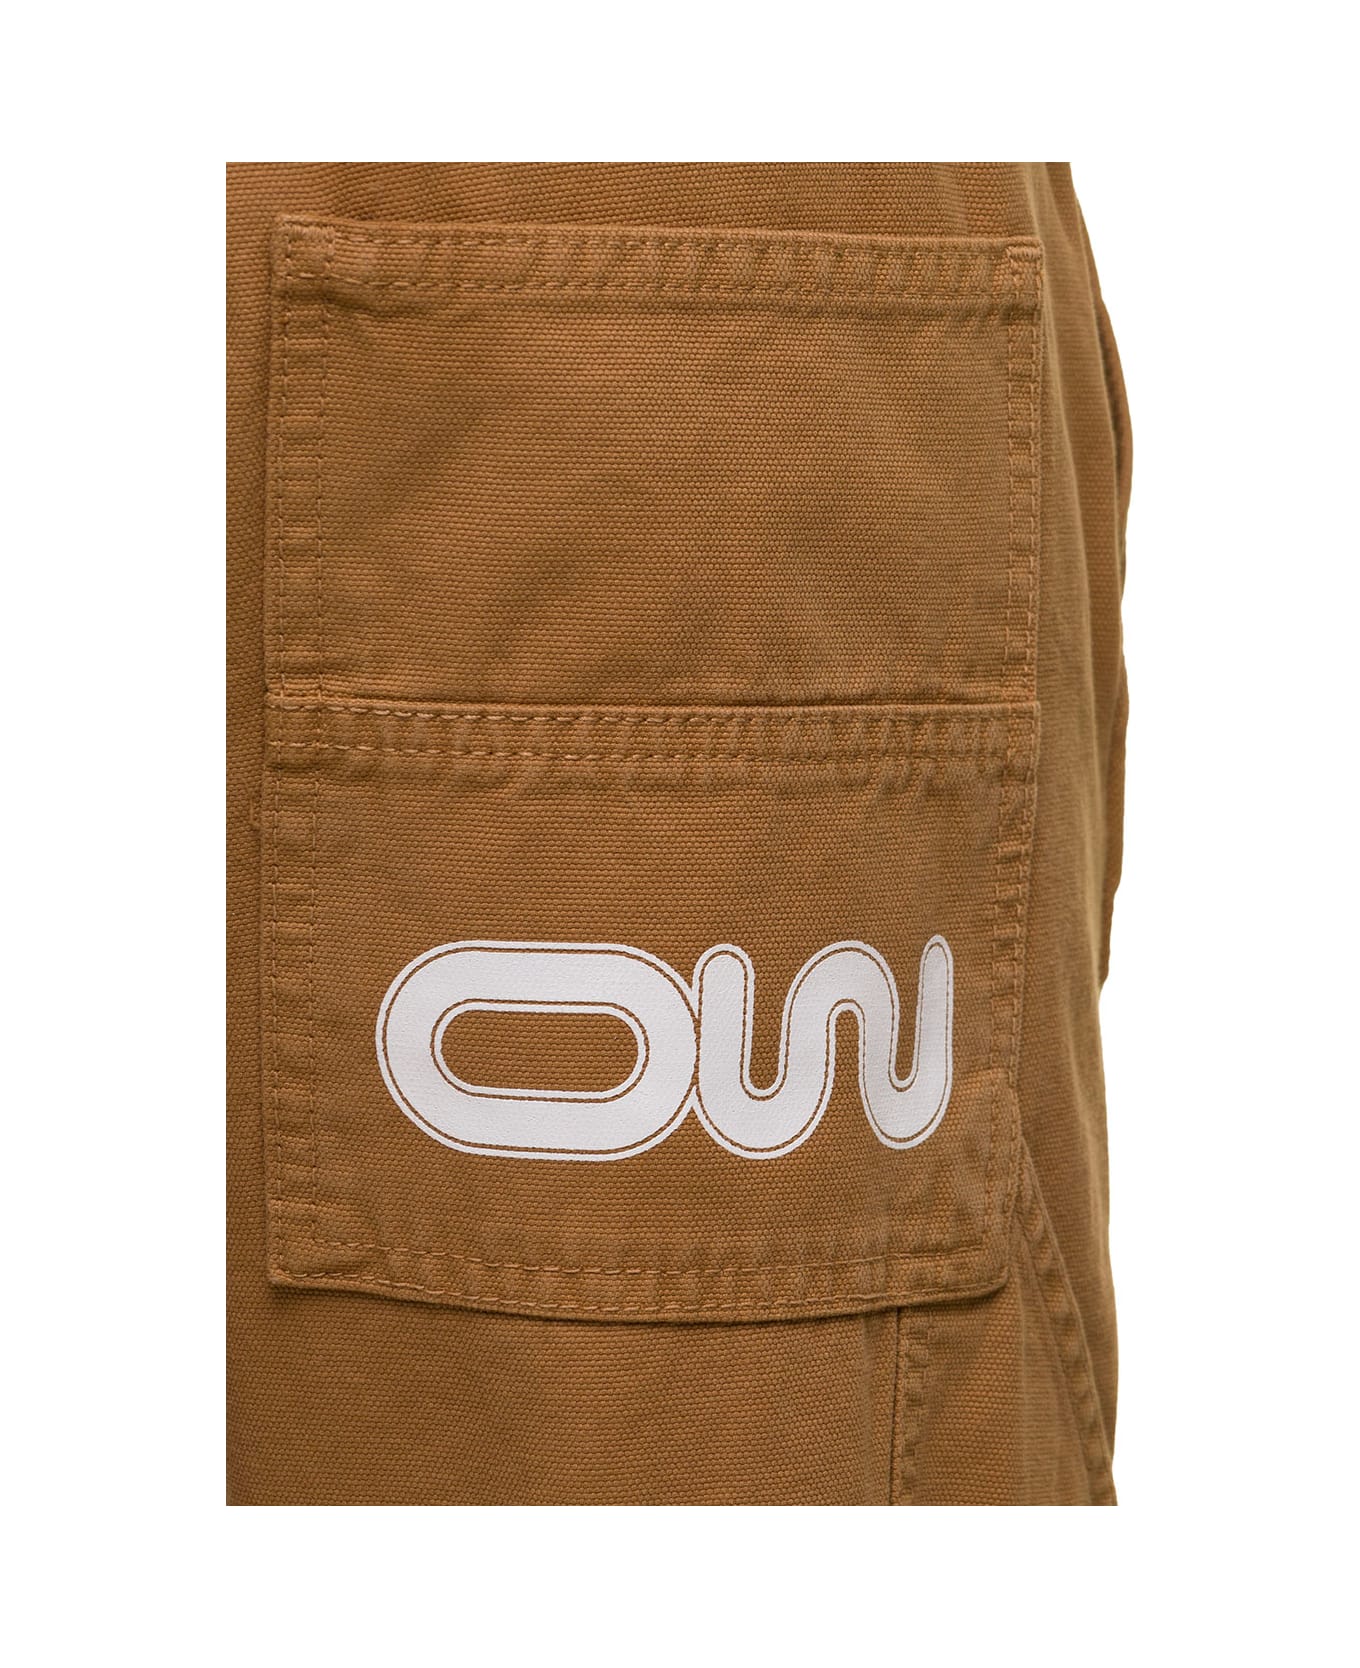 Off-White Ow Slow Canv Flare Carp Pant - Beige